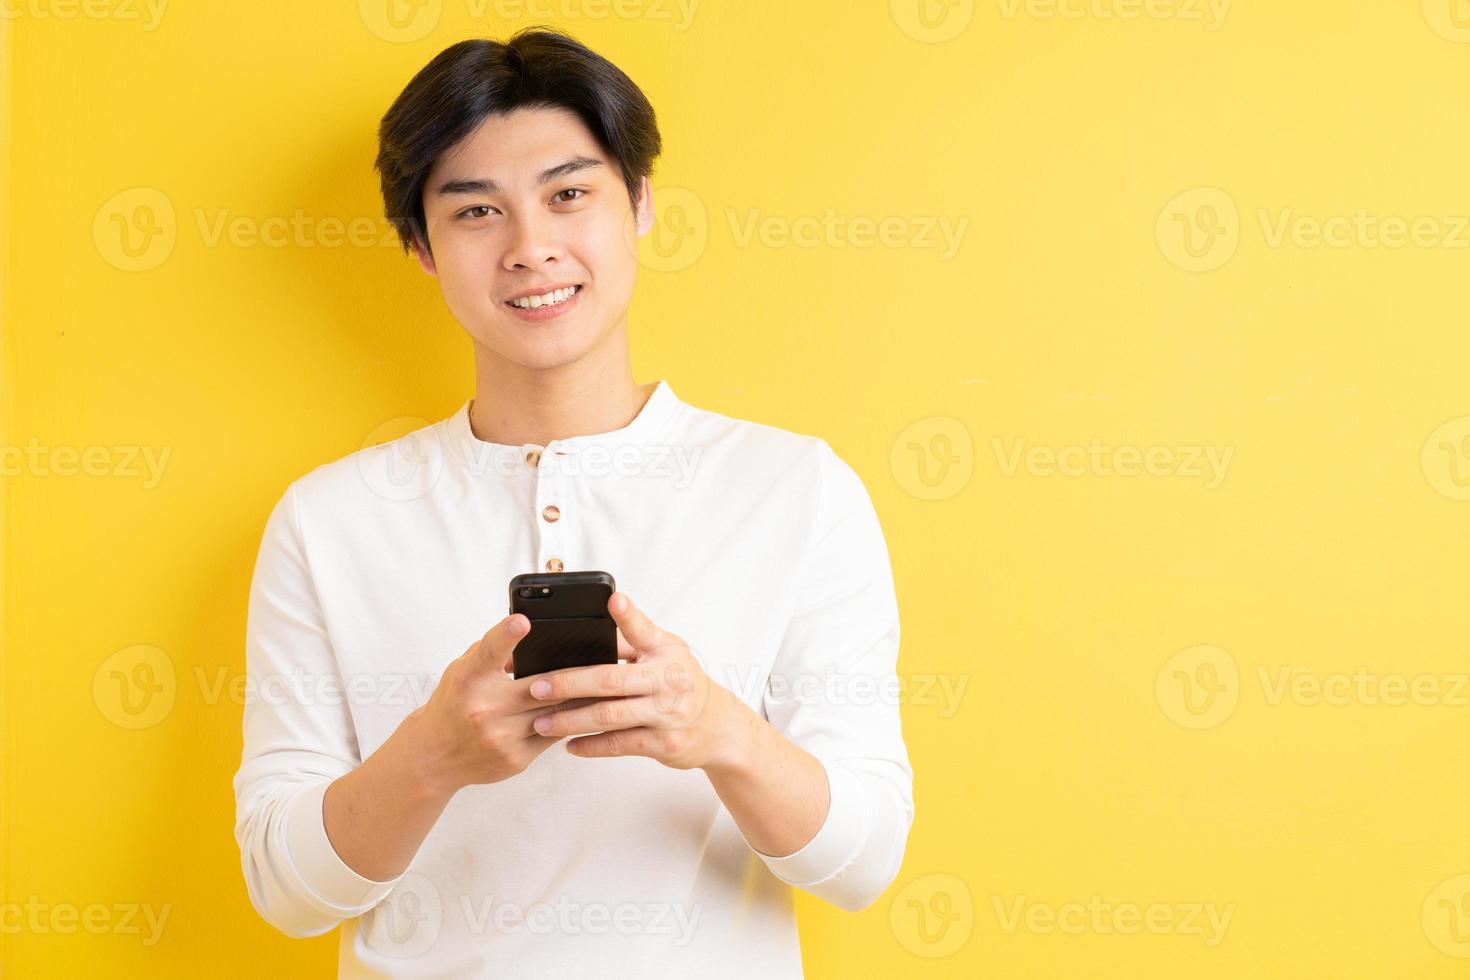 Asian man using his phone to text on a yellow background photo